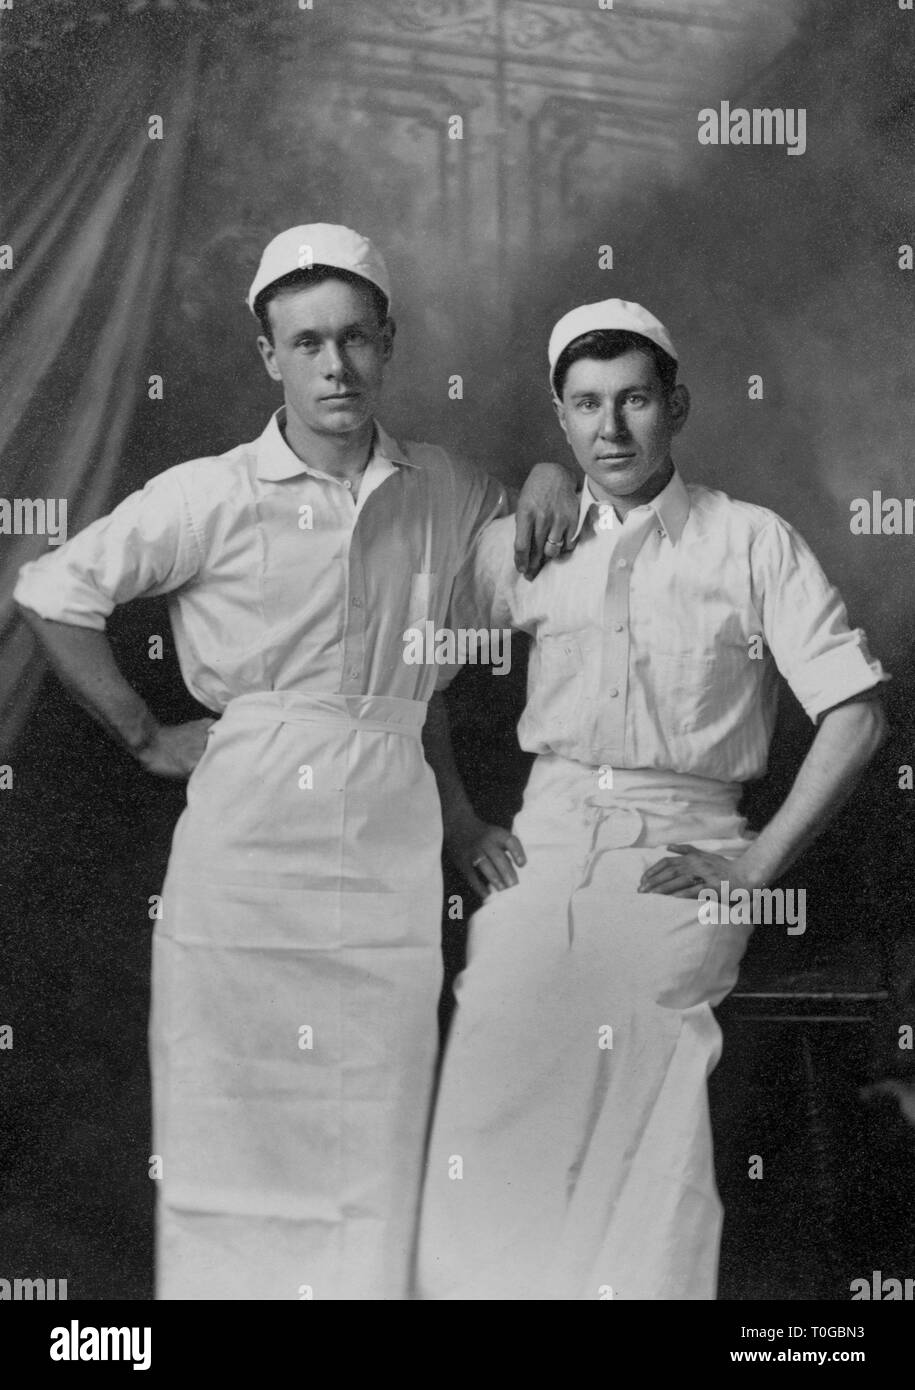 Two food industry workers, possibly bakers or butchers, pose together for a studio portrait, ca. 1910. Stock Photo